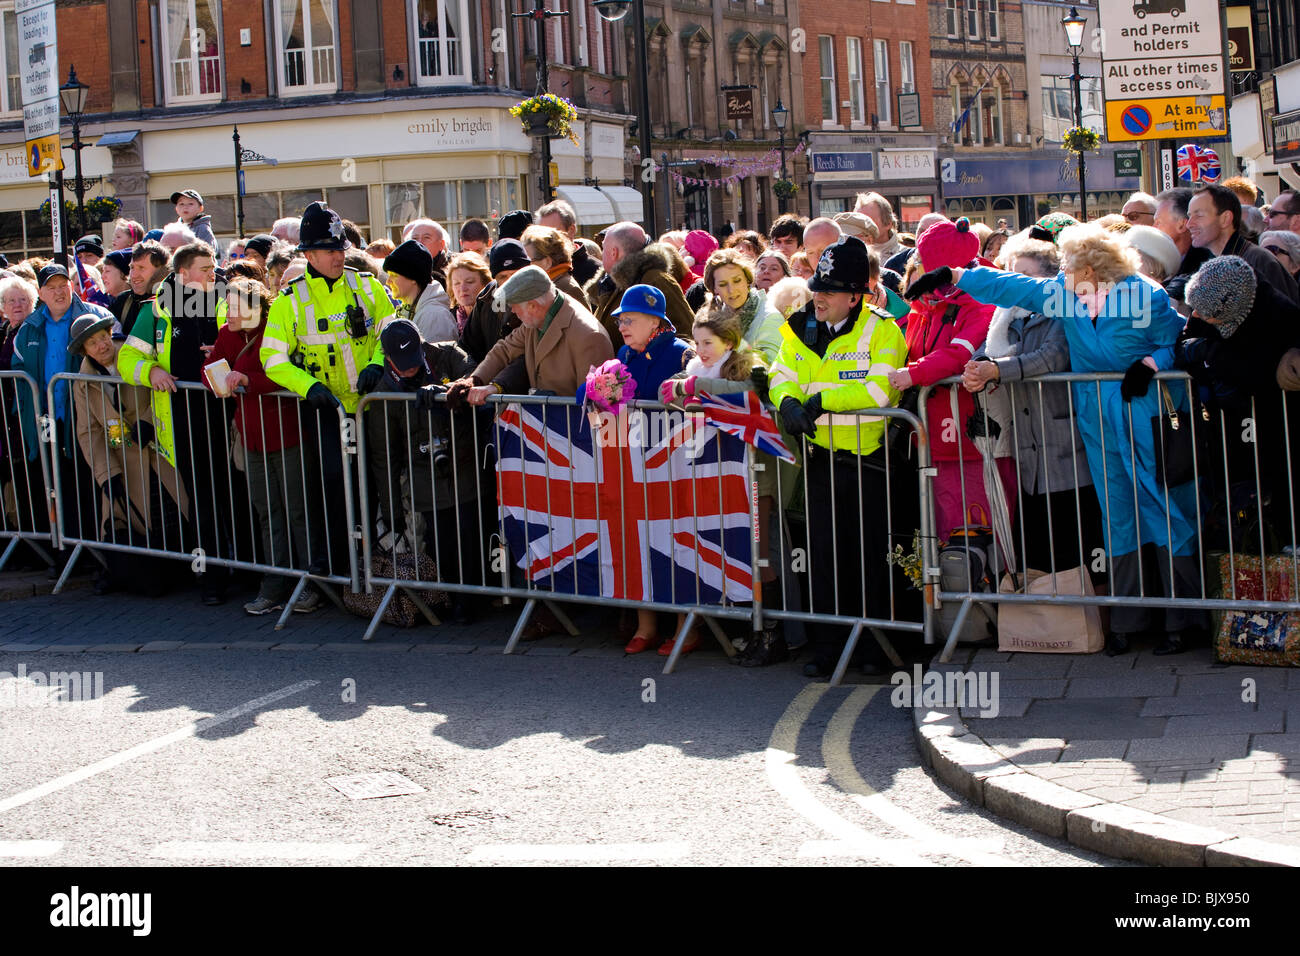 Police attending to crowd control in Derby City centre when The Queen arrives at the Cathedral for Maundy Thursday ceremony. Stock Photo